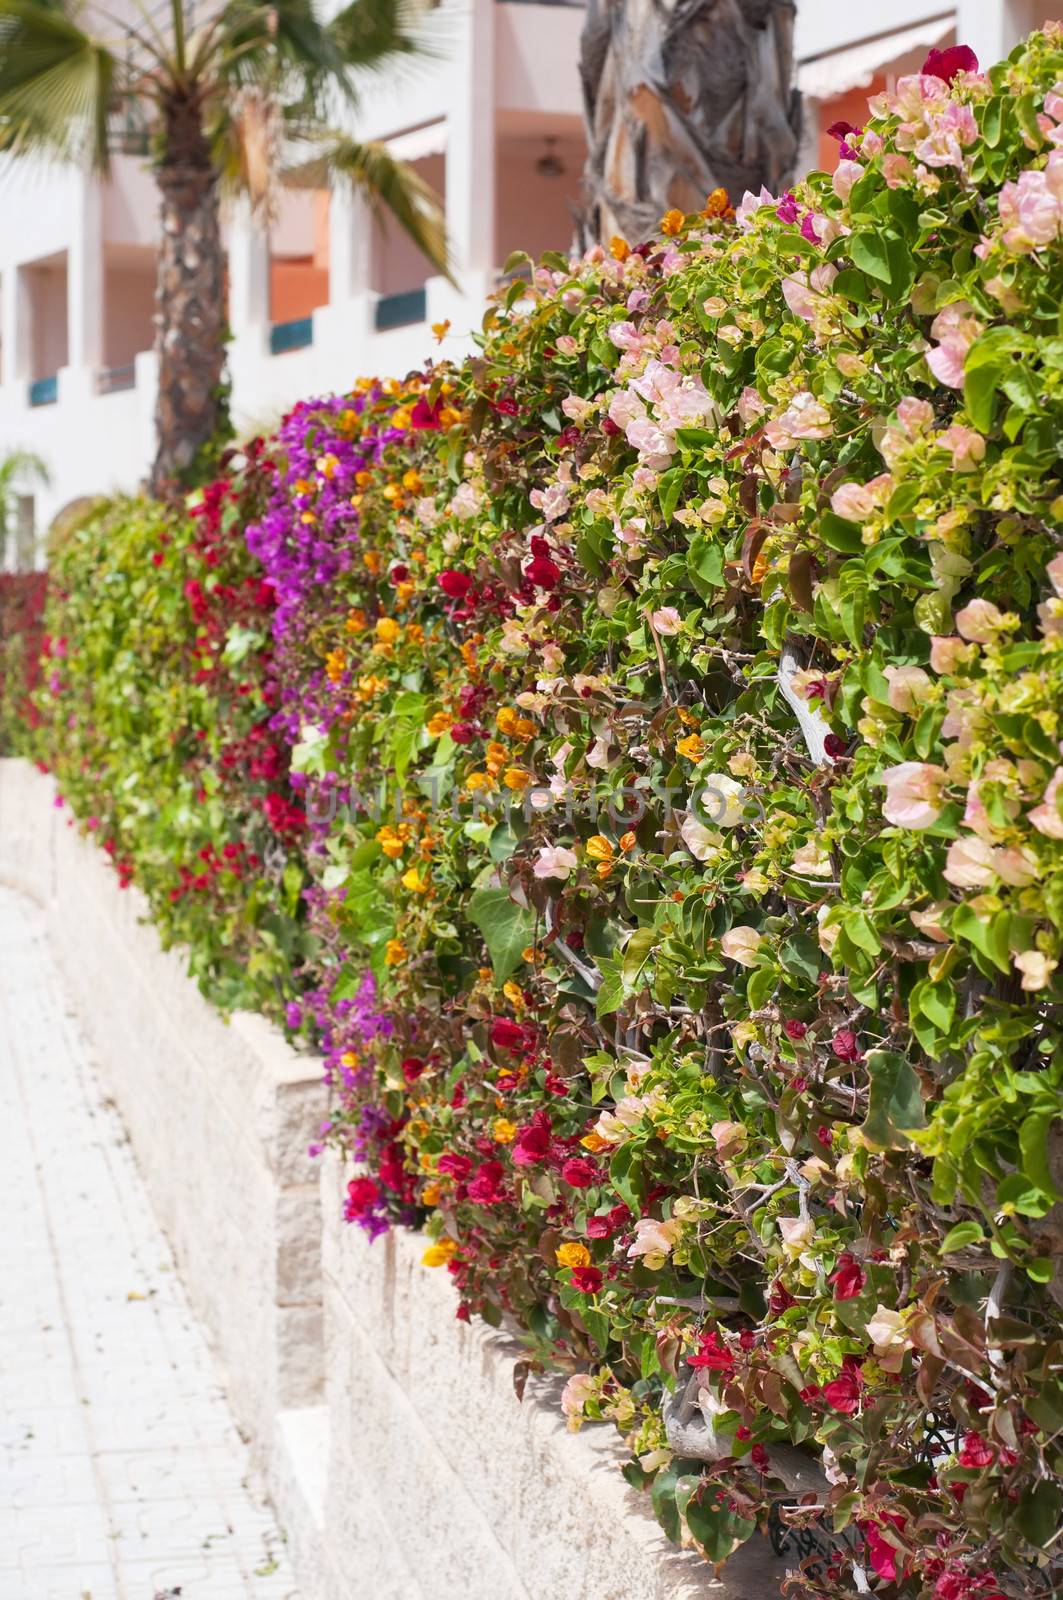 Fence of multicolored flowers bougainvillea in the city. Shallow depth of field.